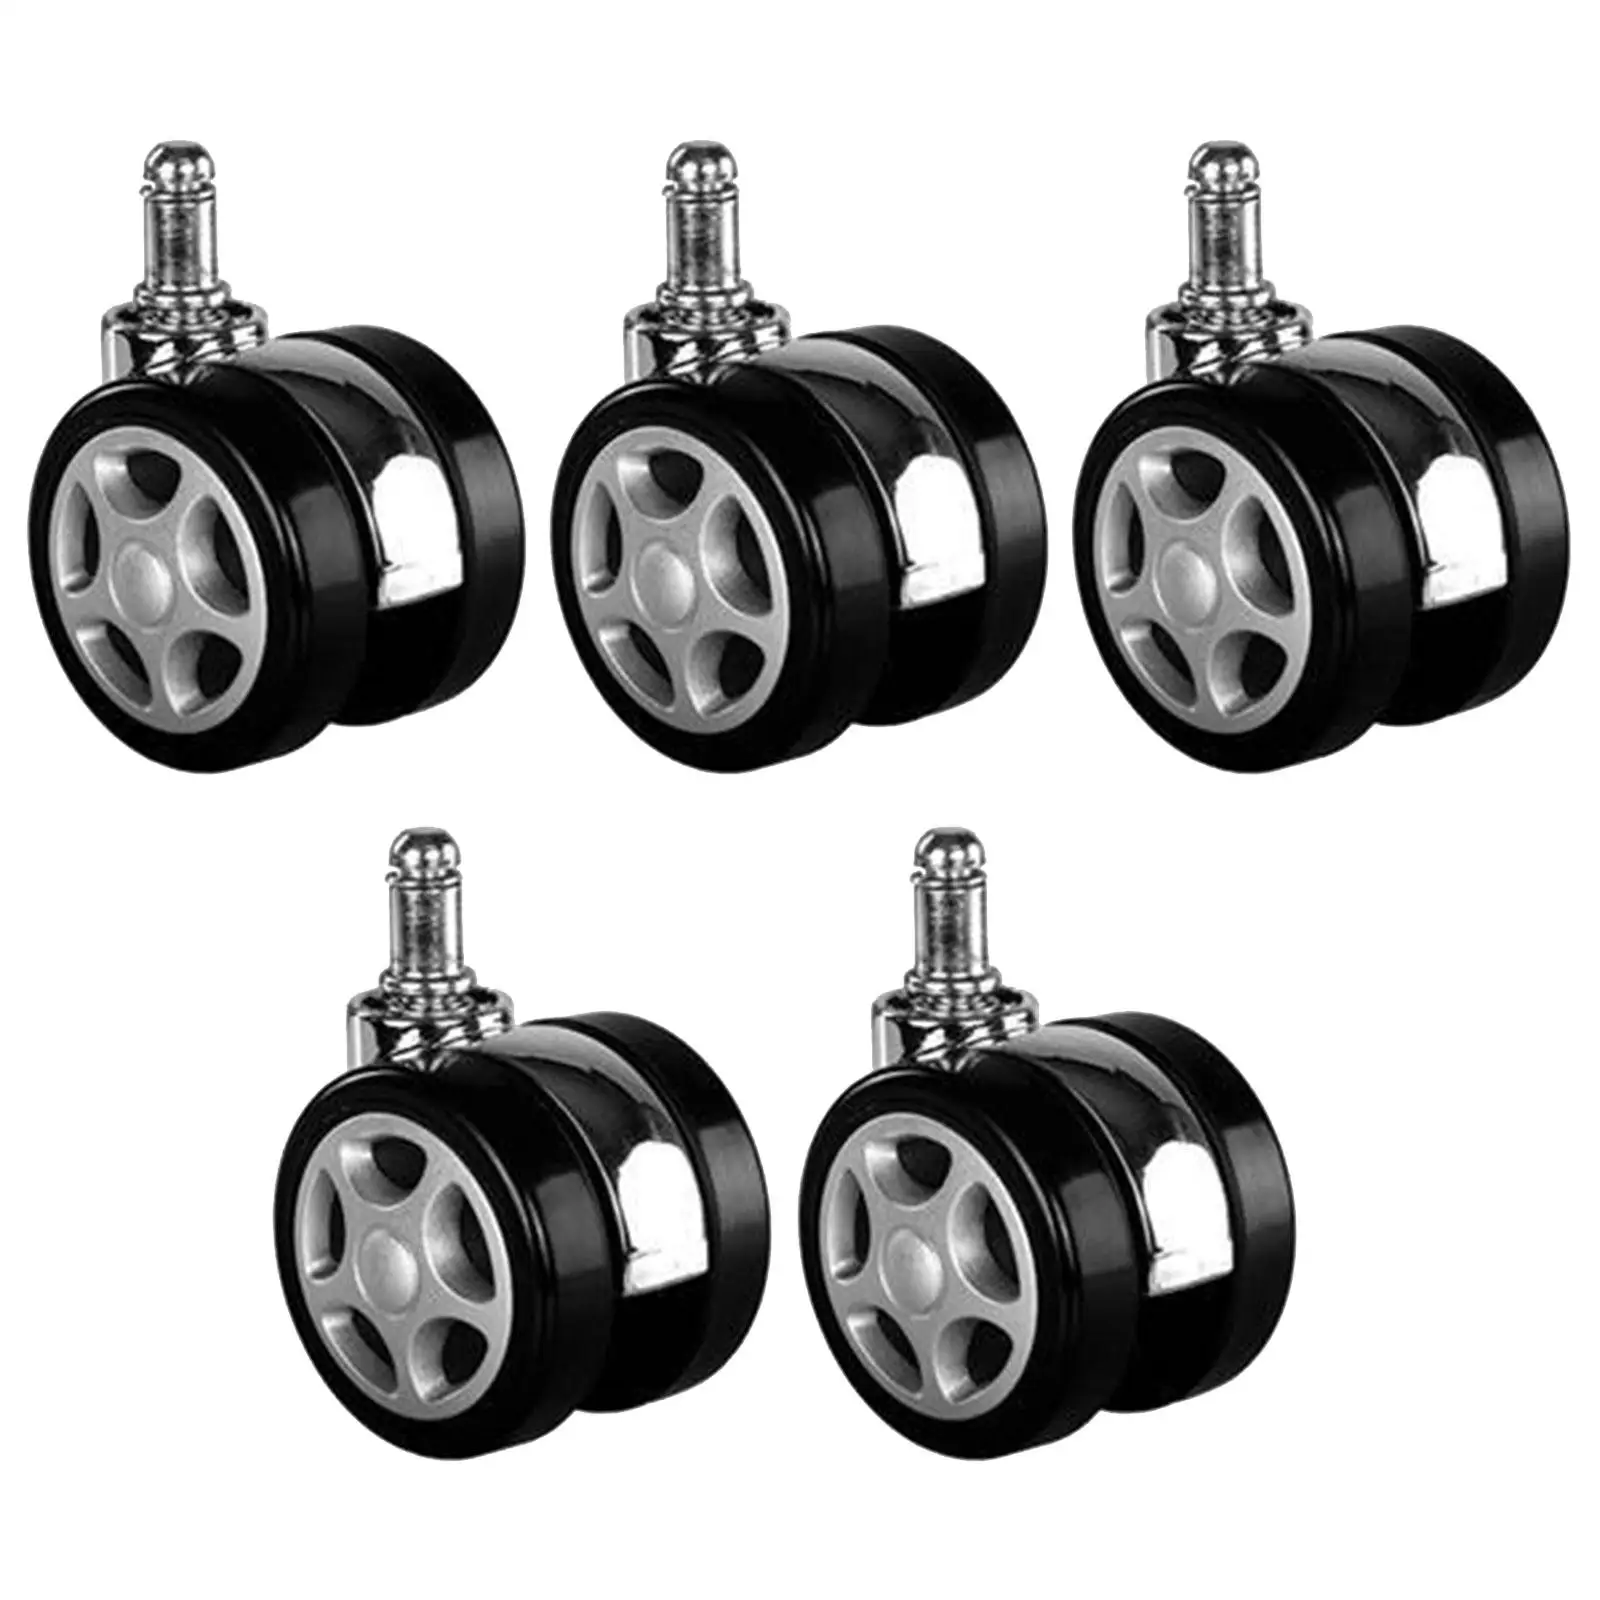 5 Pieces Office Chair Caster Wheels Heavy Duty Replacement Chair Casters